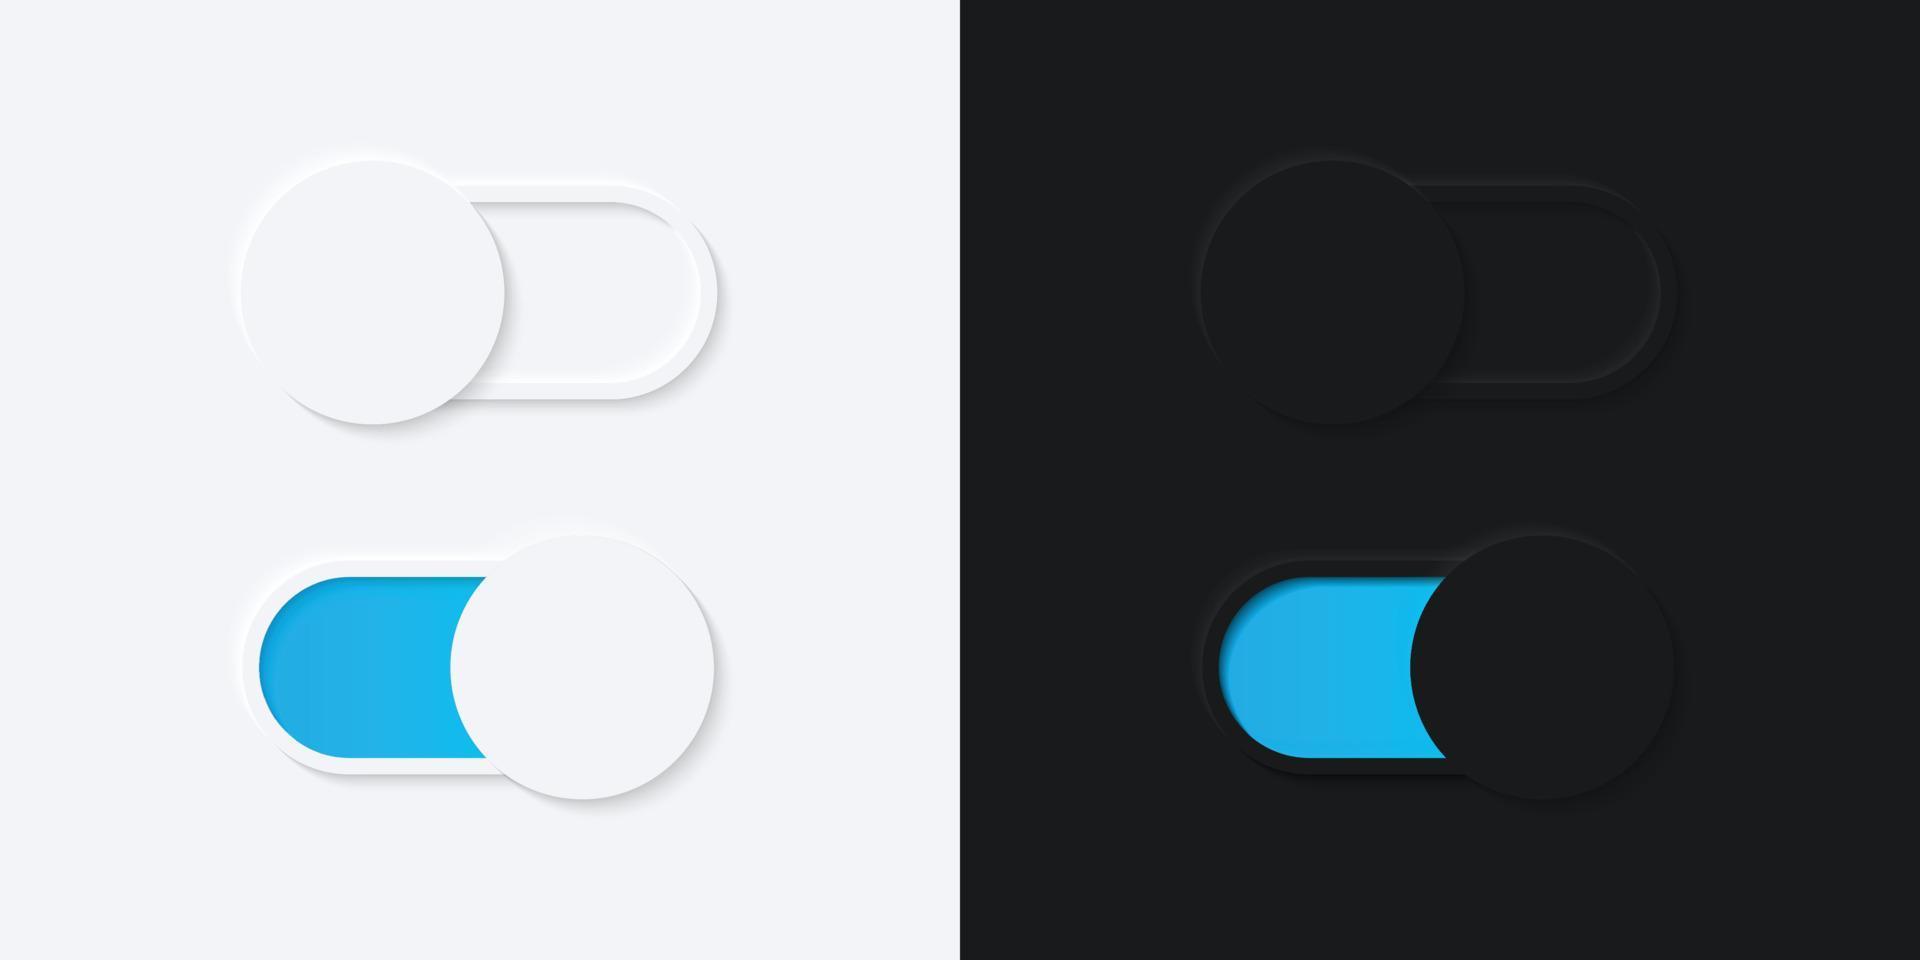 Minimalist Switch Button in Neumorphism Design. Simple, modern and elegant. Smooth and soft 3D user interface. Light mode and Dark Mode. For website or apps design. Vector Illustration.